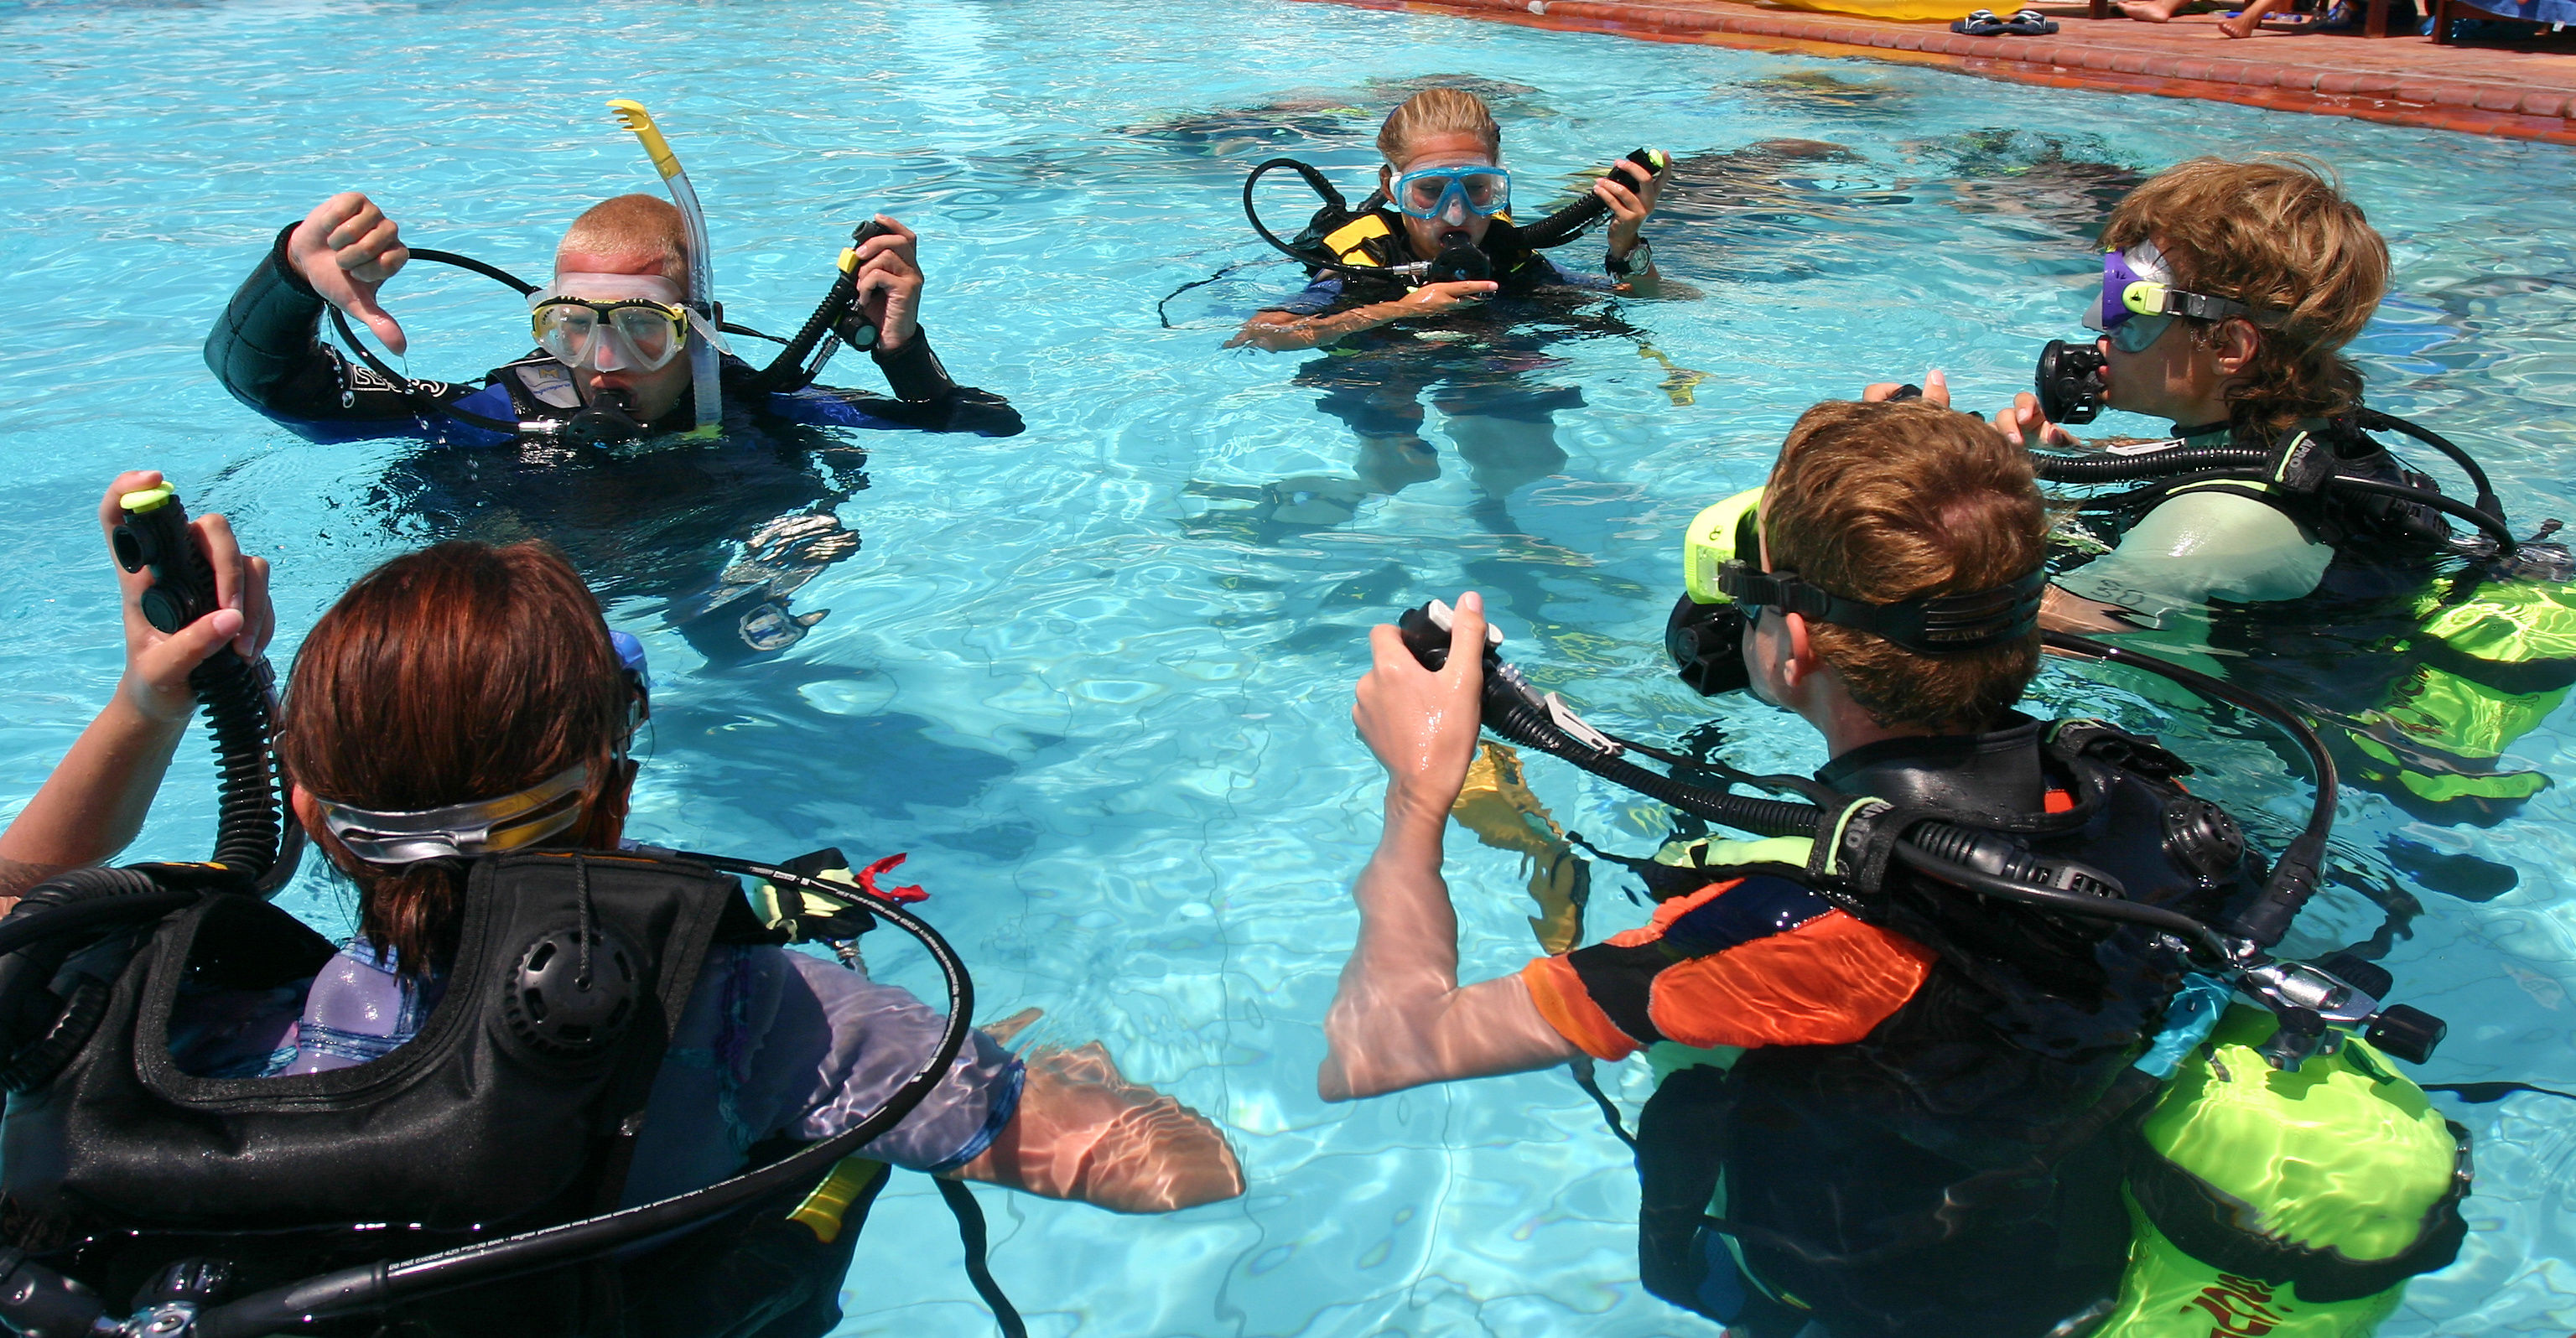 A group of scuba divers learning to dive in a swimming pool in Bangkok.